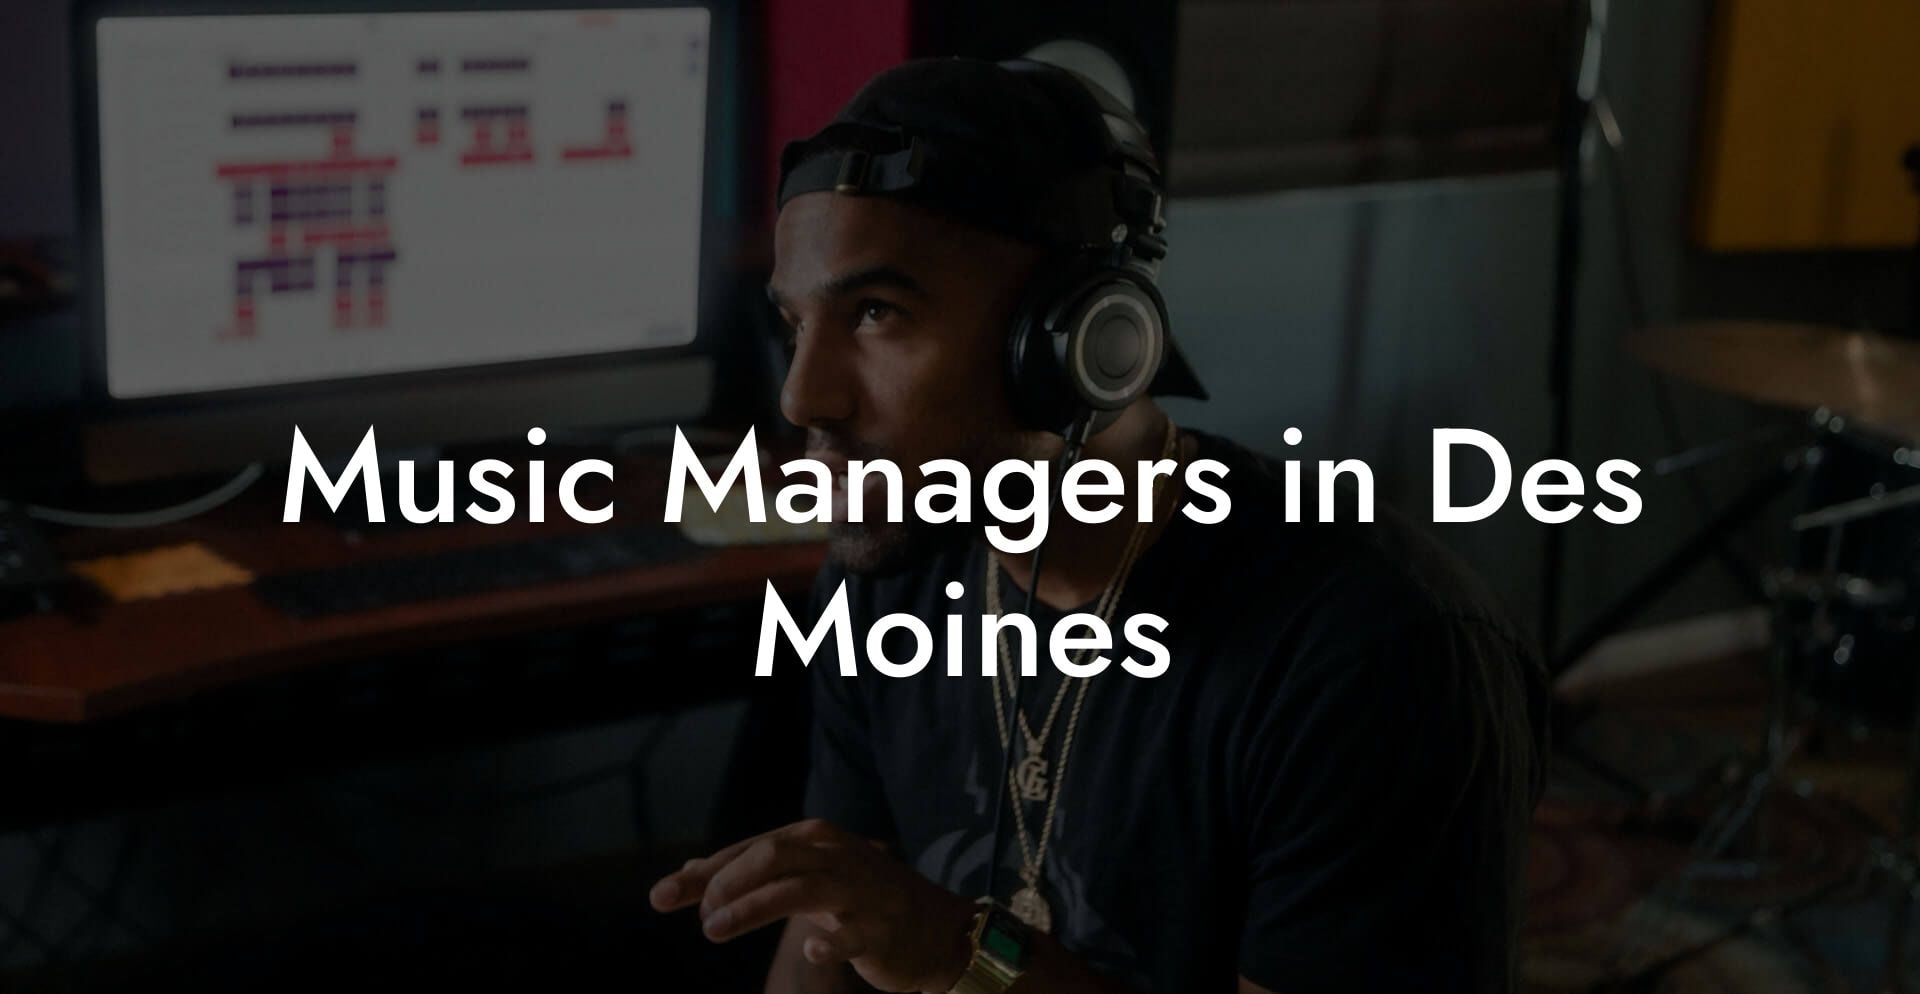 Music Managers in Des Moines